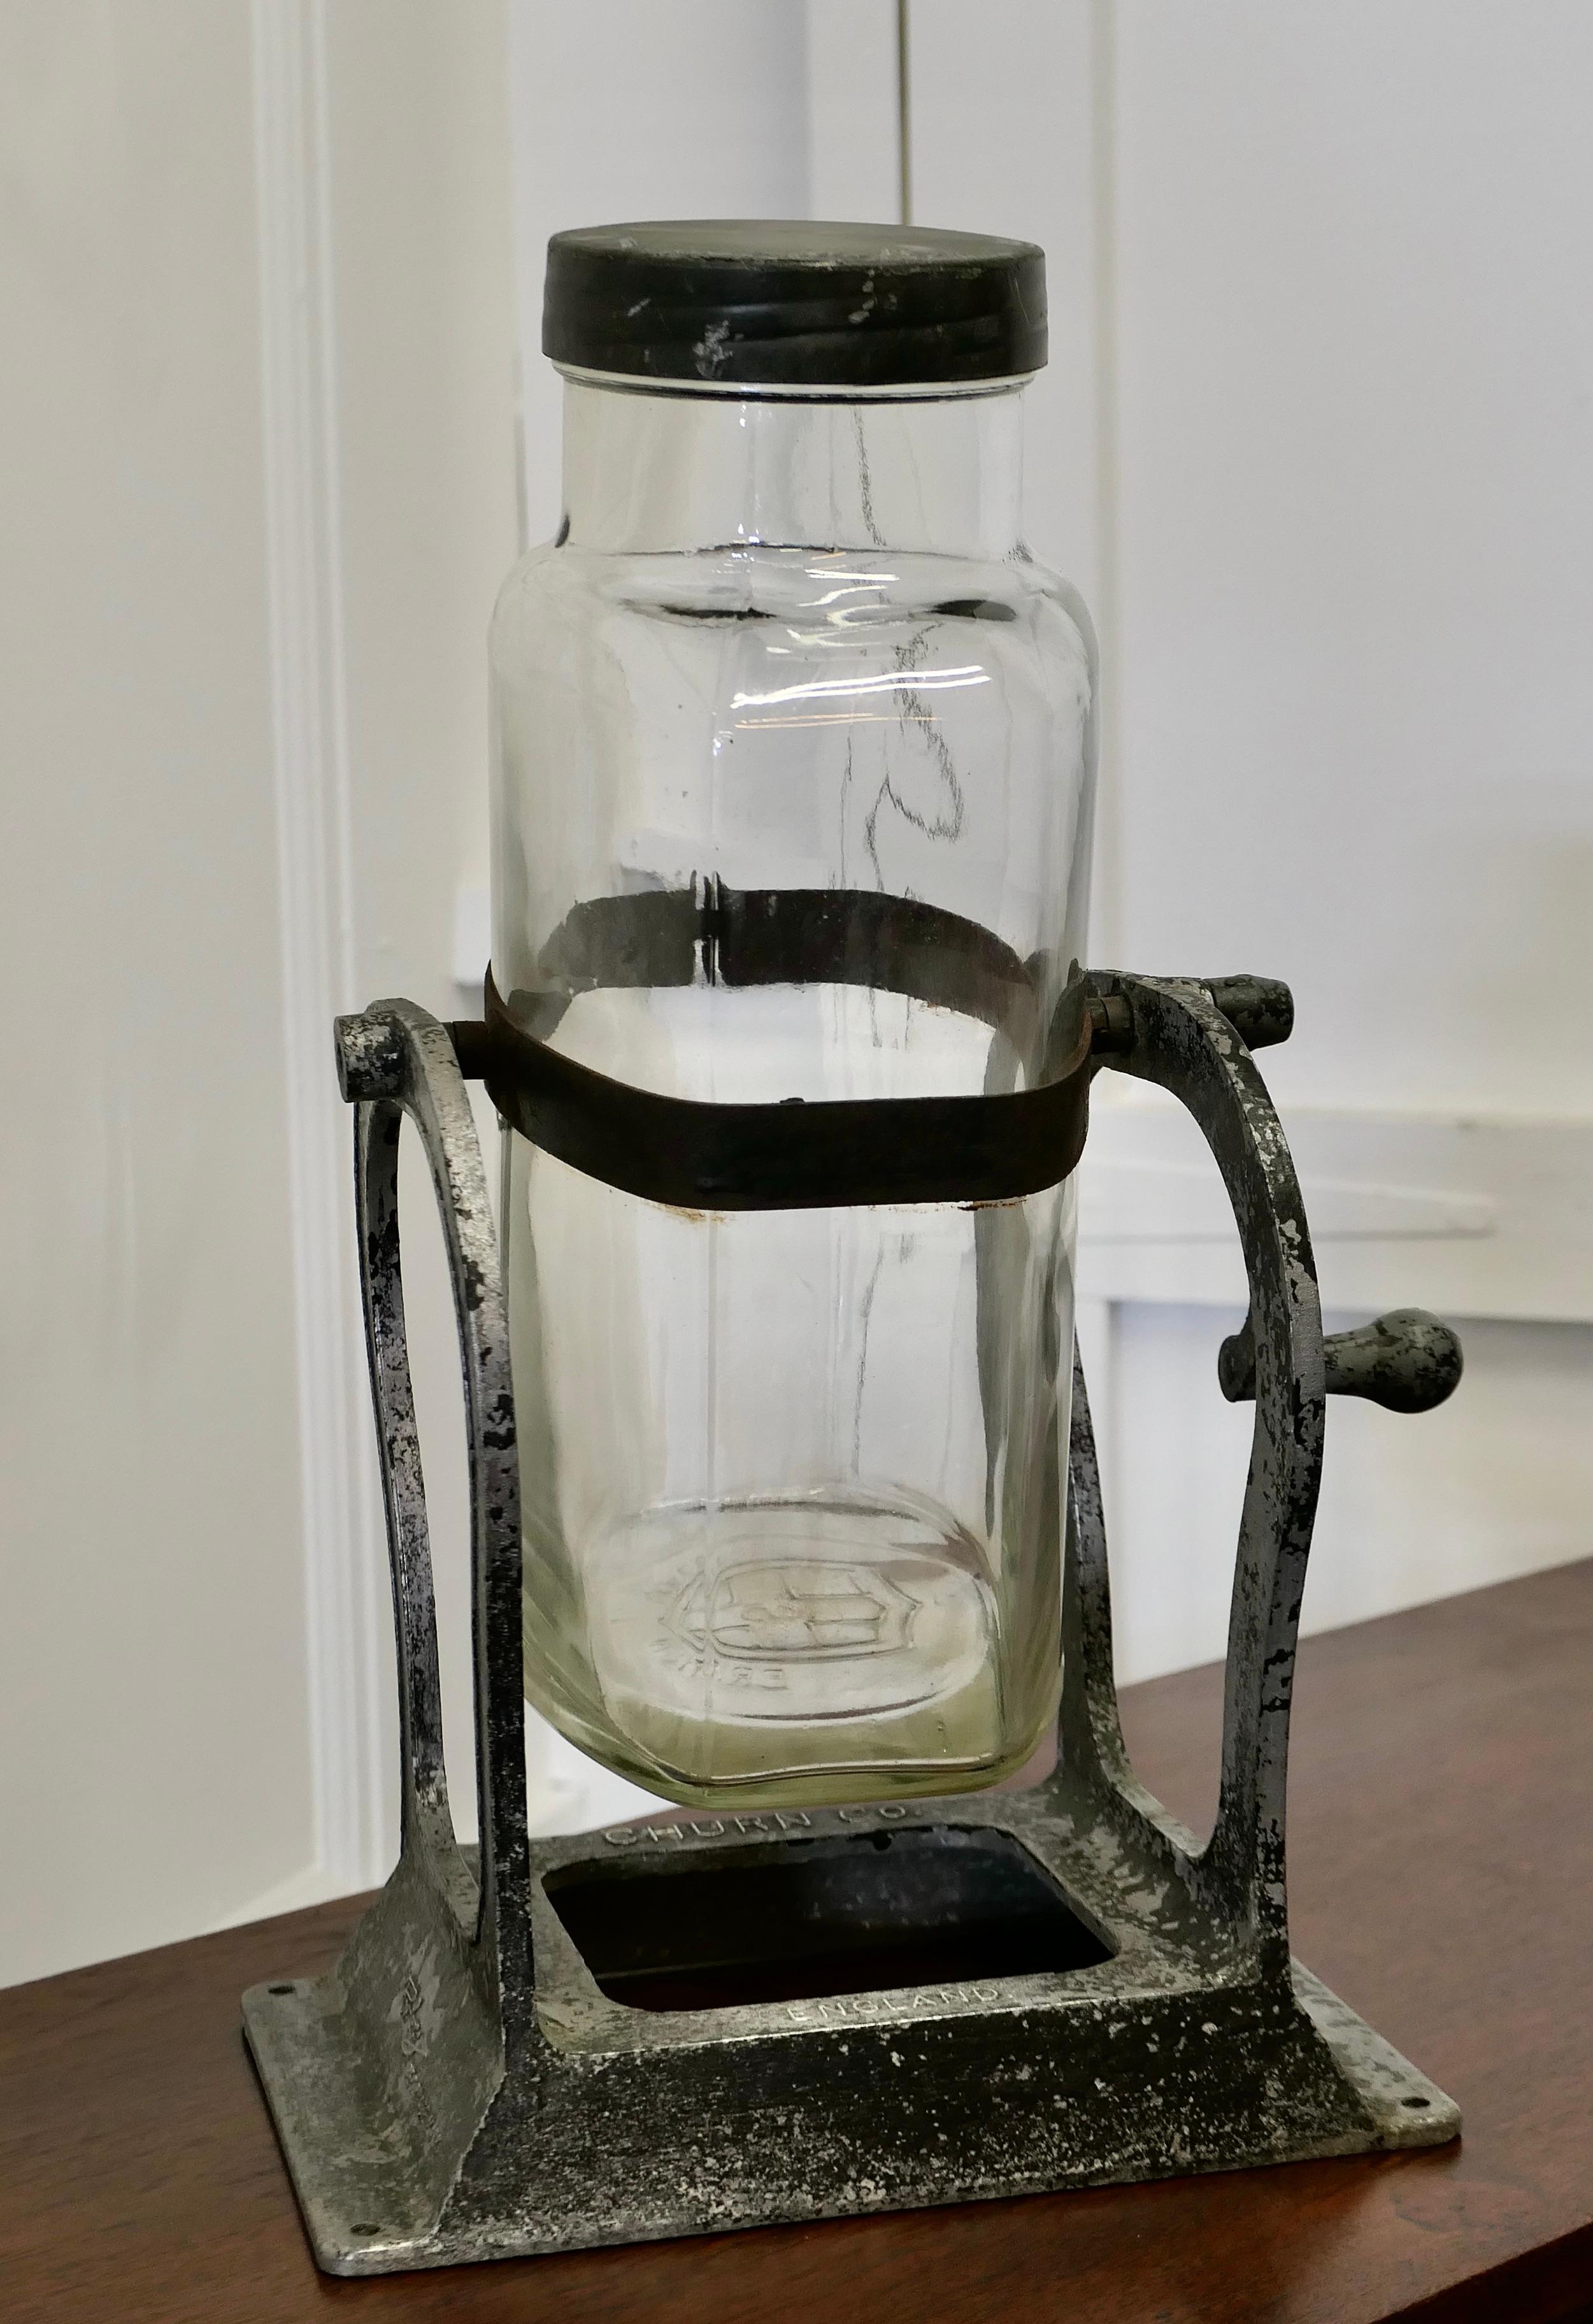 An Excellent Hand Driven Home Butter Churn 

The Churn has a cast metal frame stamped Rowbury Churn Co, the large glass jar is strapped in the centre and is connected to the winding handle , it all works perfectly well if a little primitive in